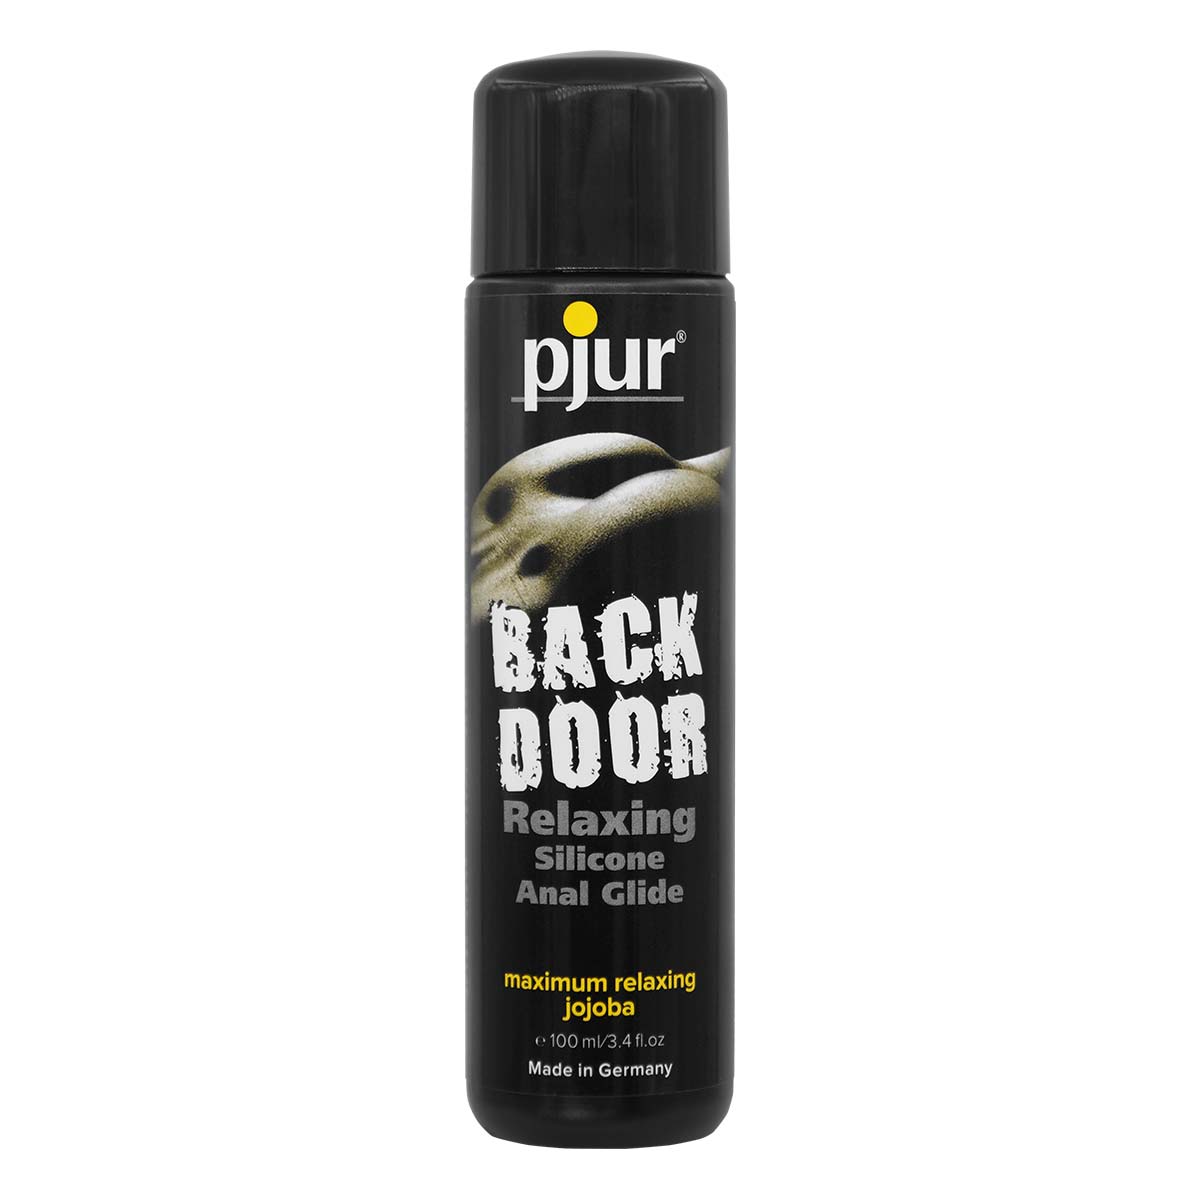 pjur BACK DOOR RELAXING Silicone Anal Glide 100ml Silicone-based Lubricant-p_2